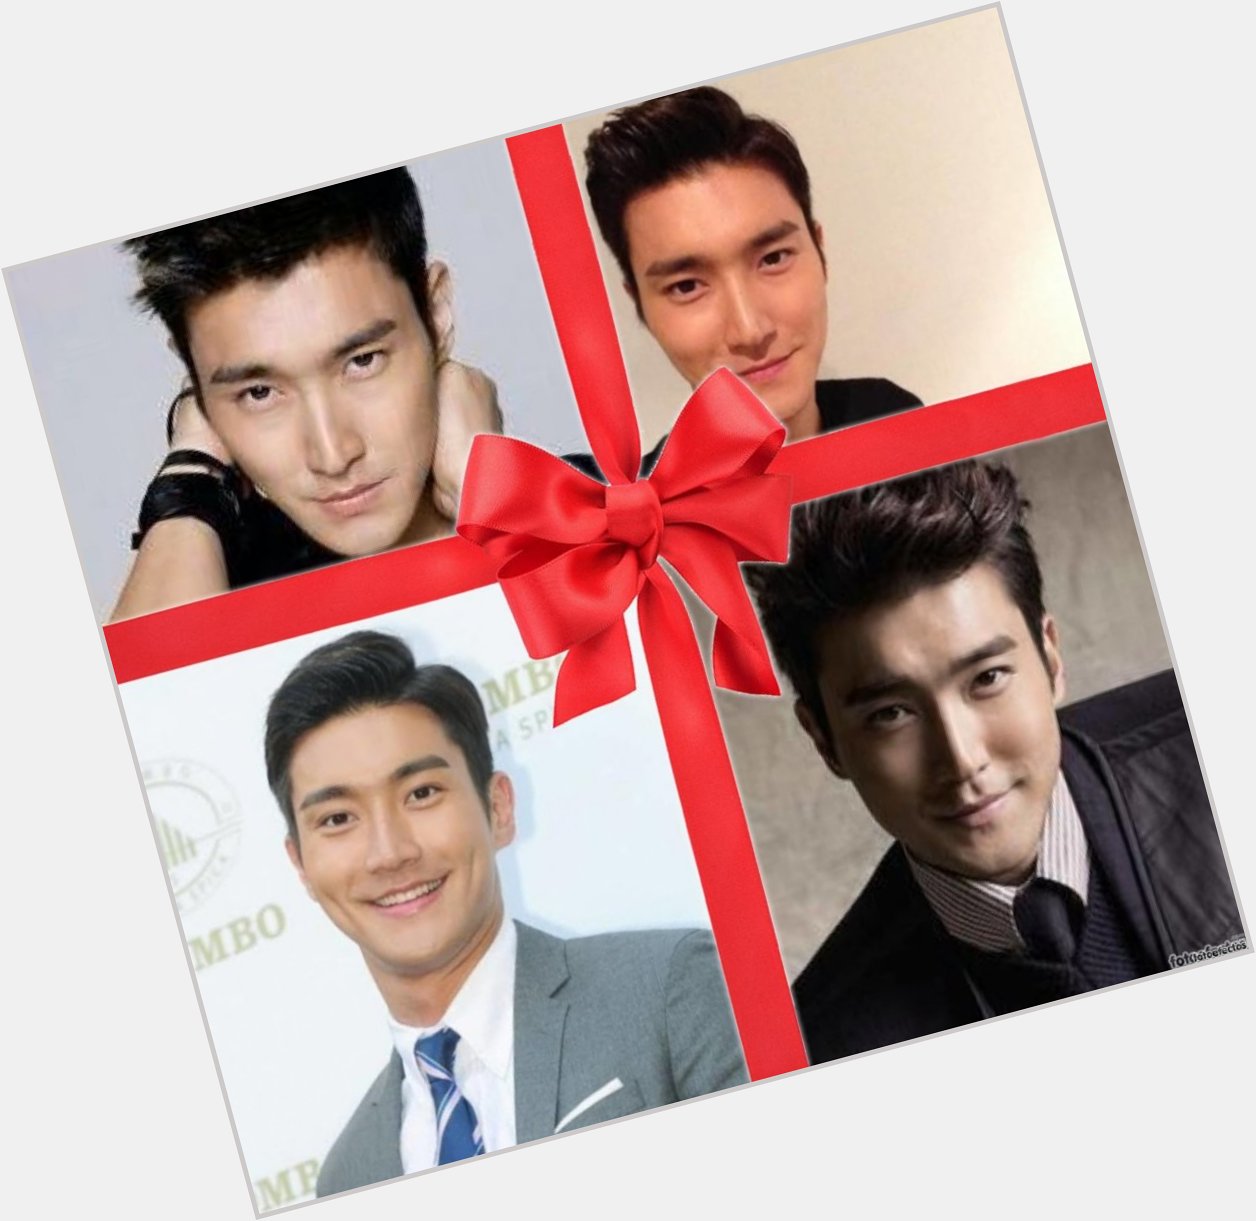  Happy birthday handsome man Choi Siwon   Blessings from Mexico   Dios te bendiga siempre 